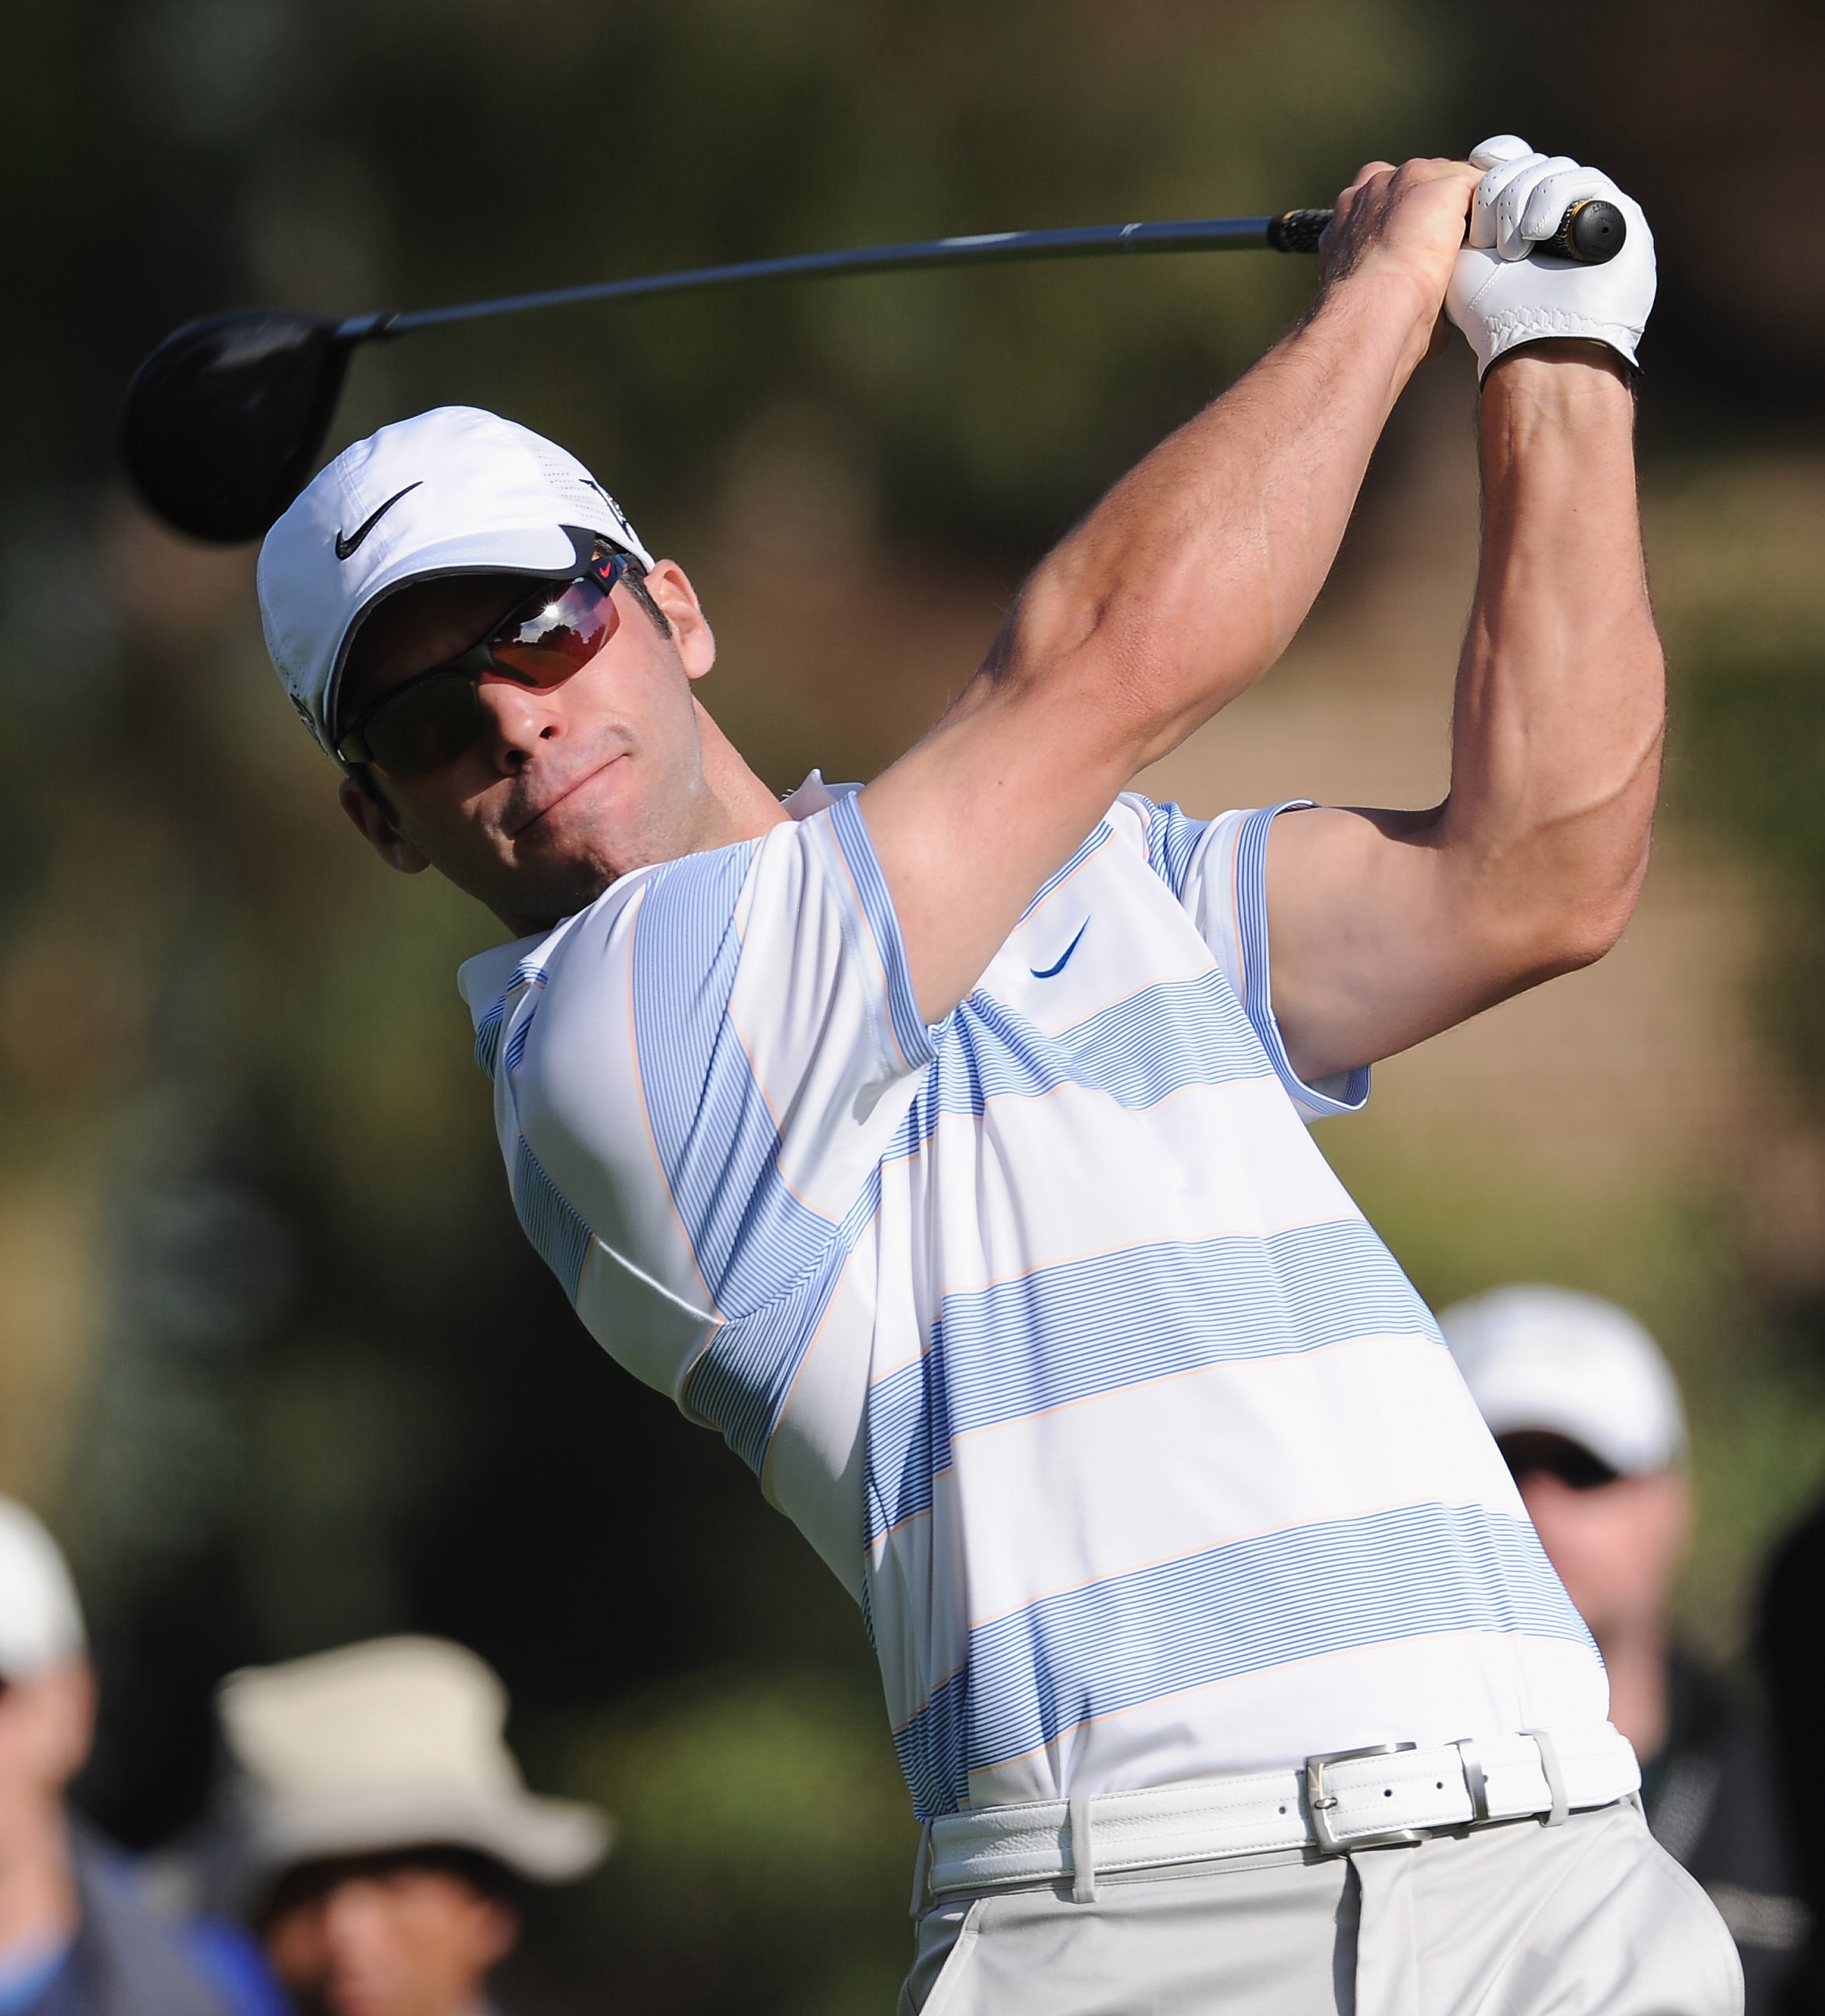 PACIFIC PALISADES, CA - FEBRUARY 17:  Paul Casey of England plays his tee shot on the second hole during the first round of the Northern Trust Open at Riviera Country Club on February 17, 2011 in Pacific Palisades, California.  (Photo by Stuart Franklin/G